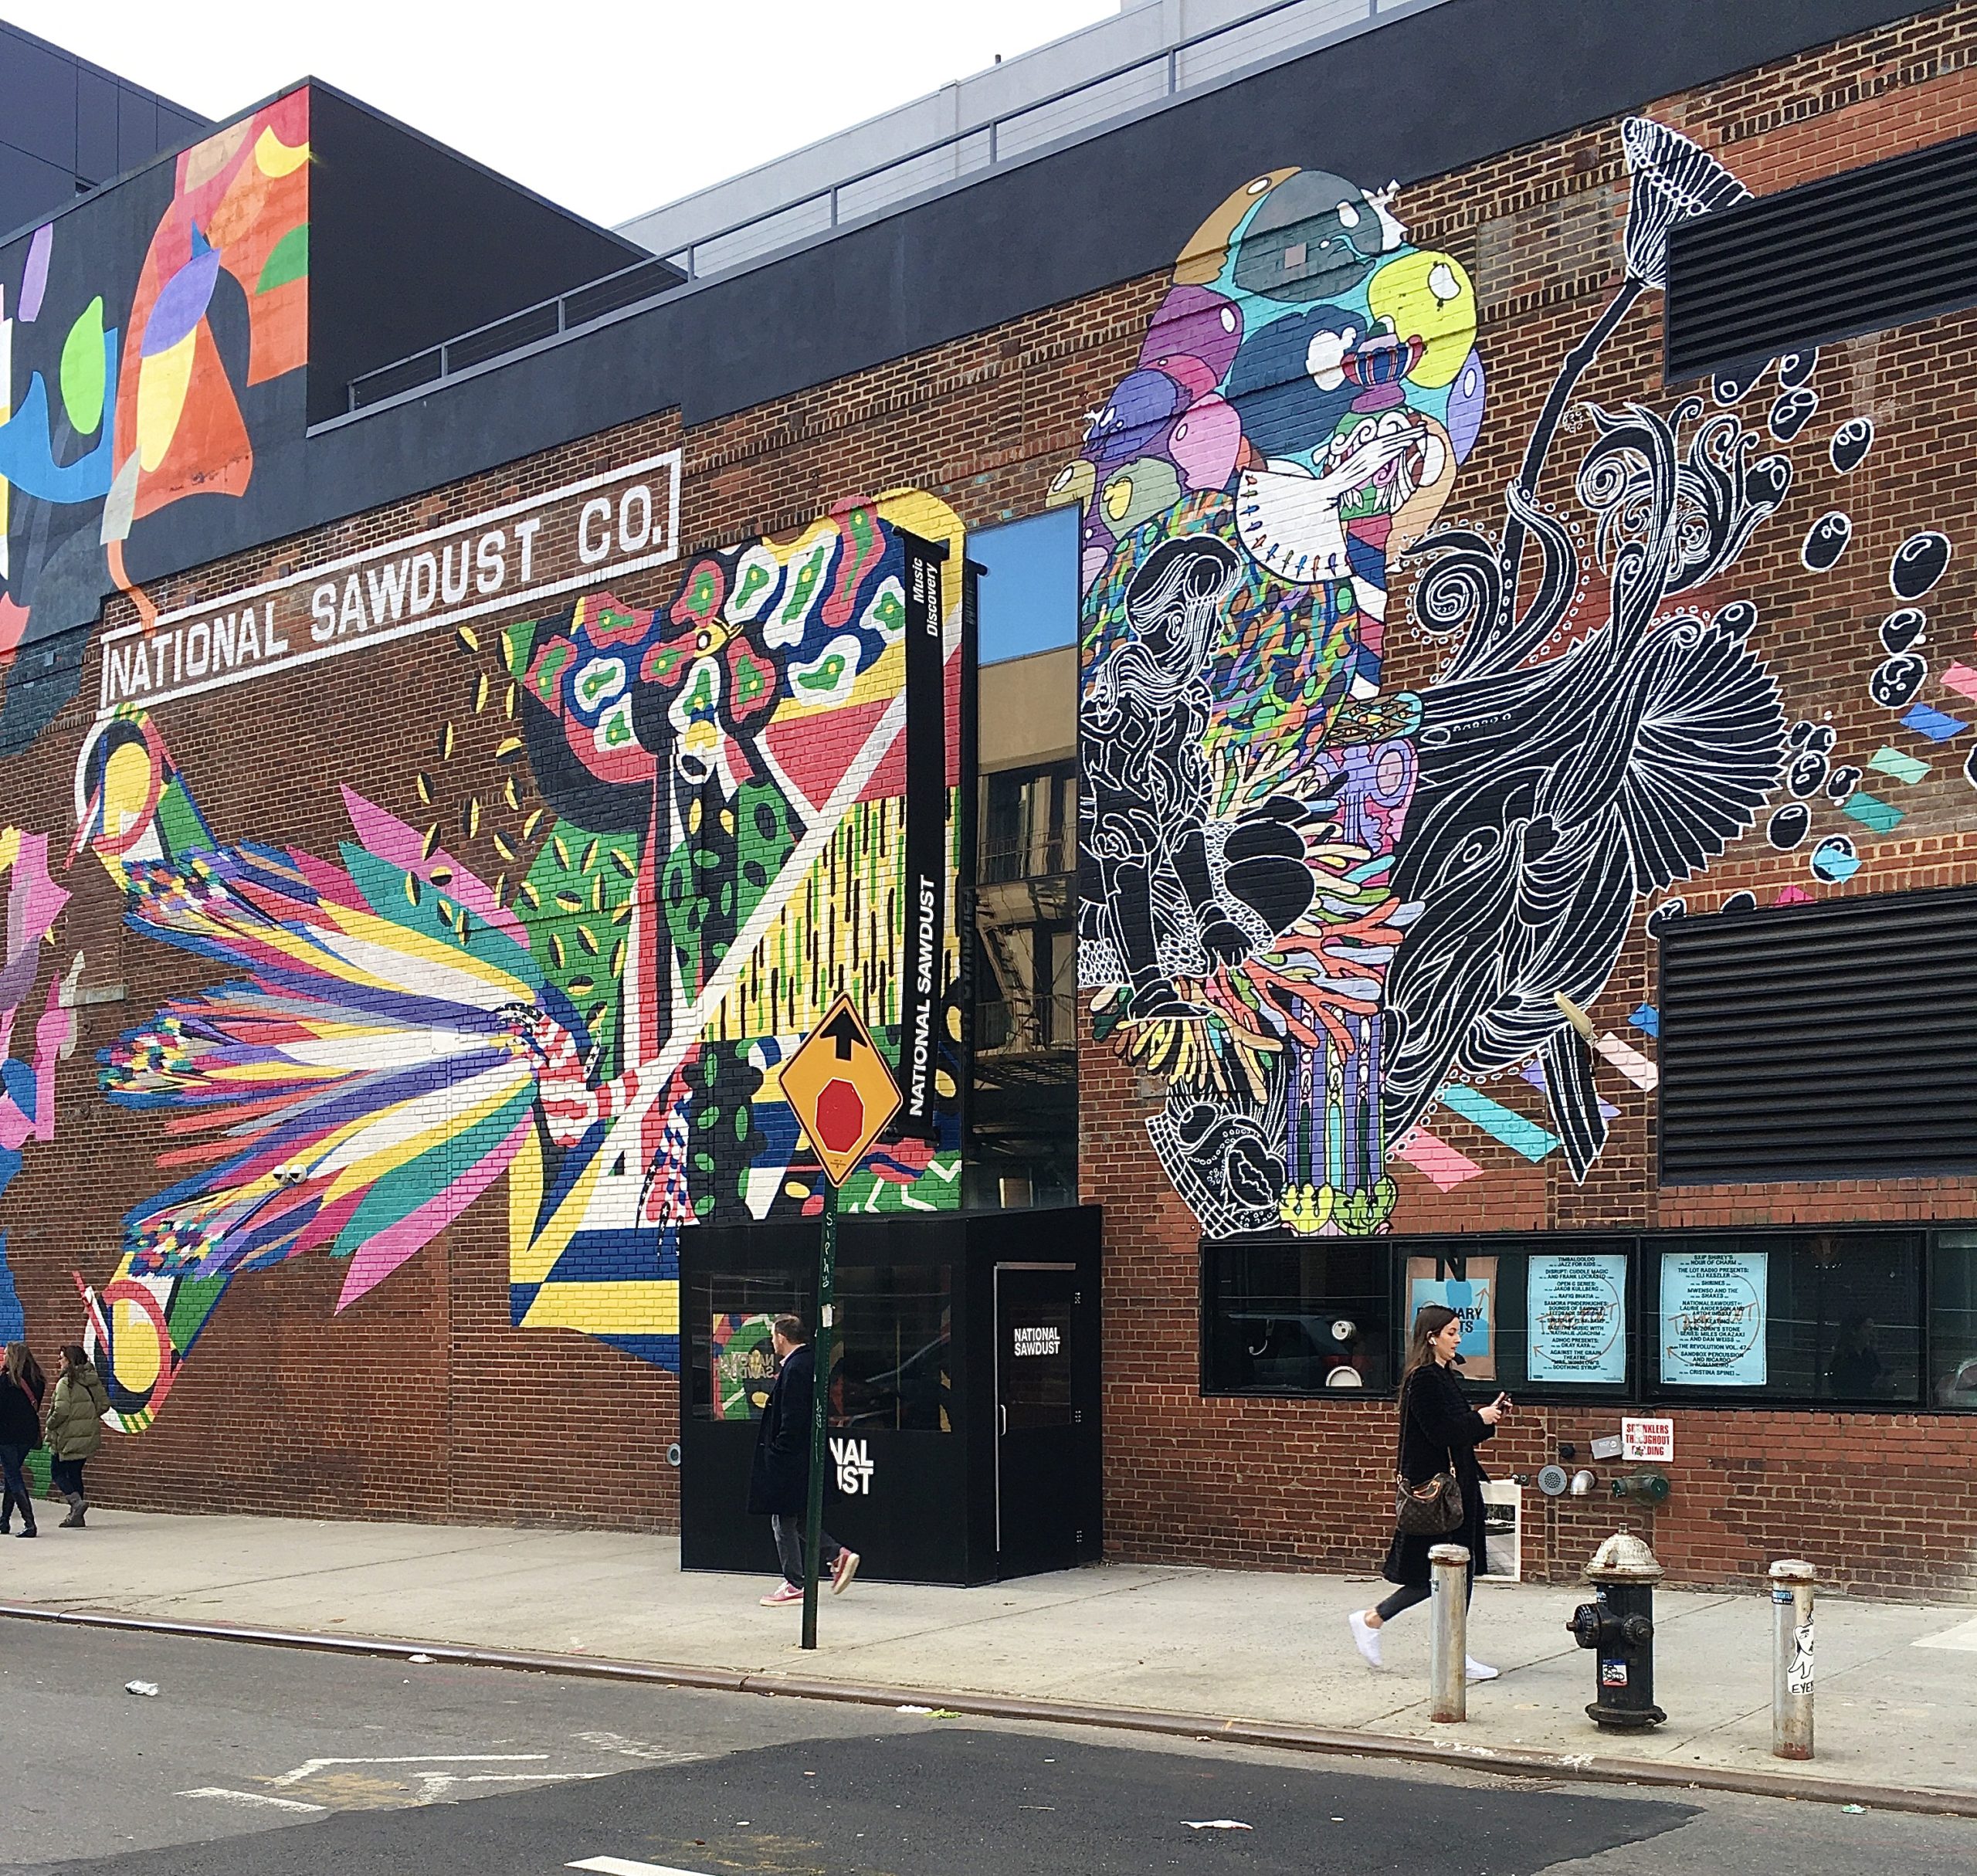 There’s an eye-catching mural on the facade of National Sawdust, a music performance venue. Photo: Lore Croghan/Brooklyn Eagle